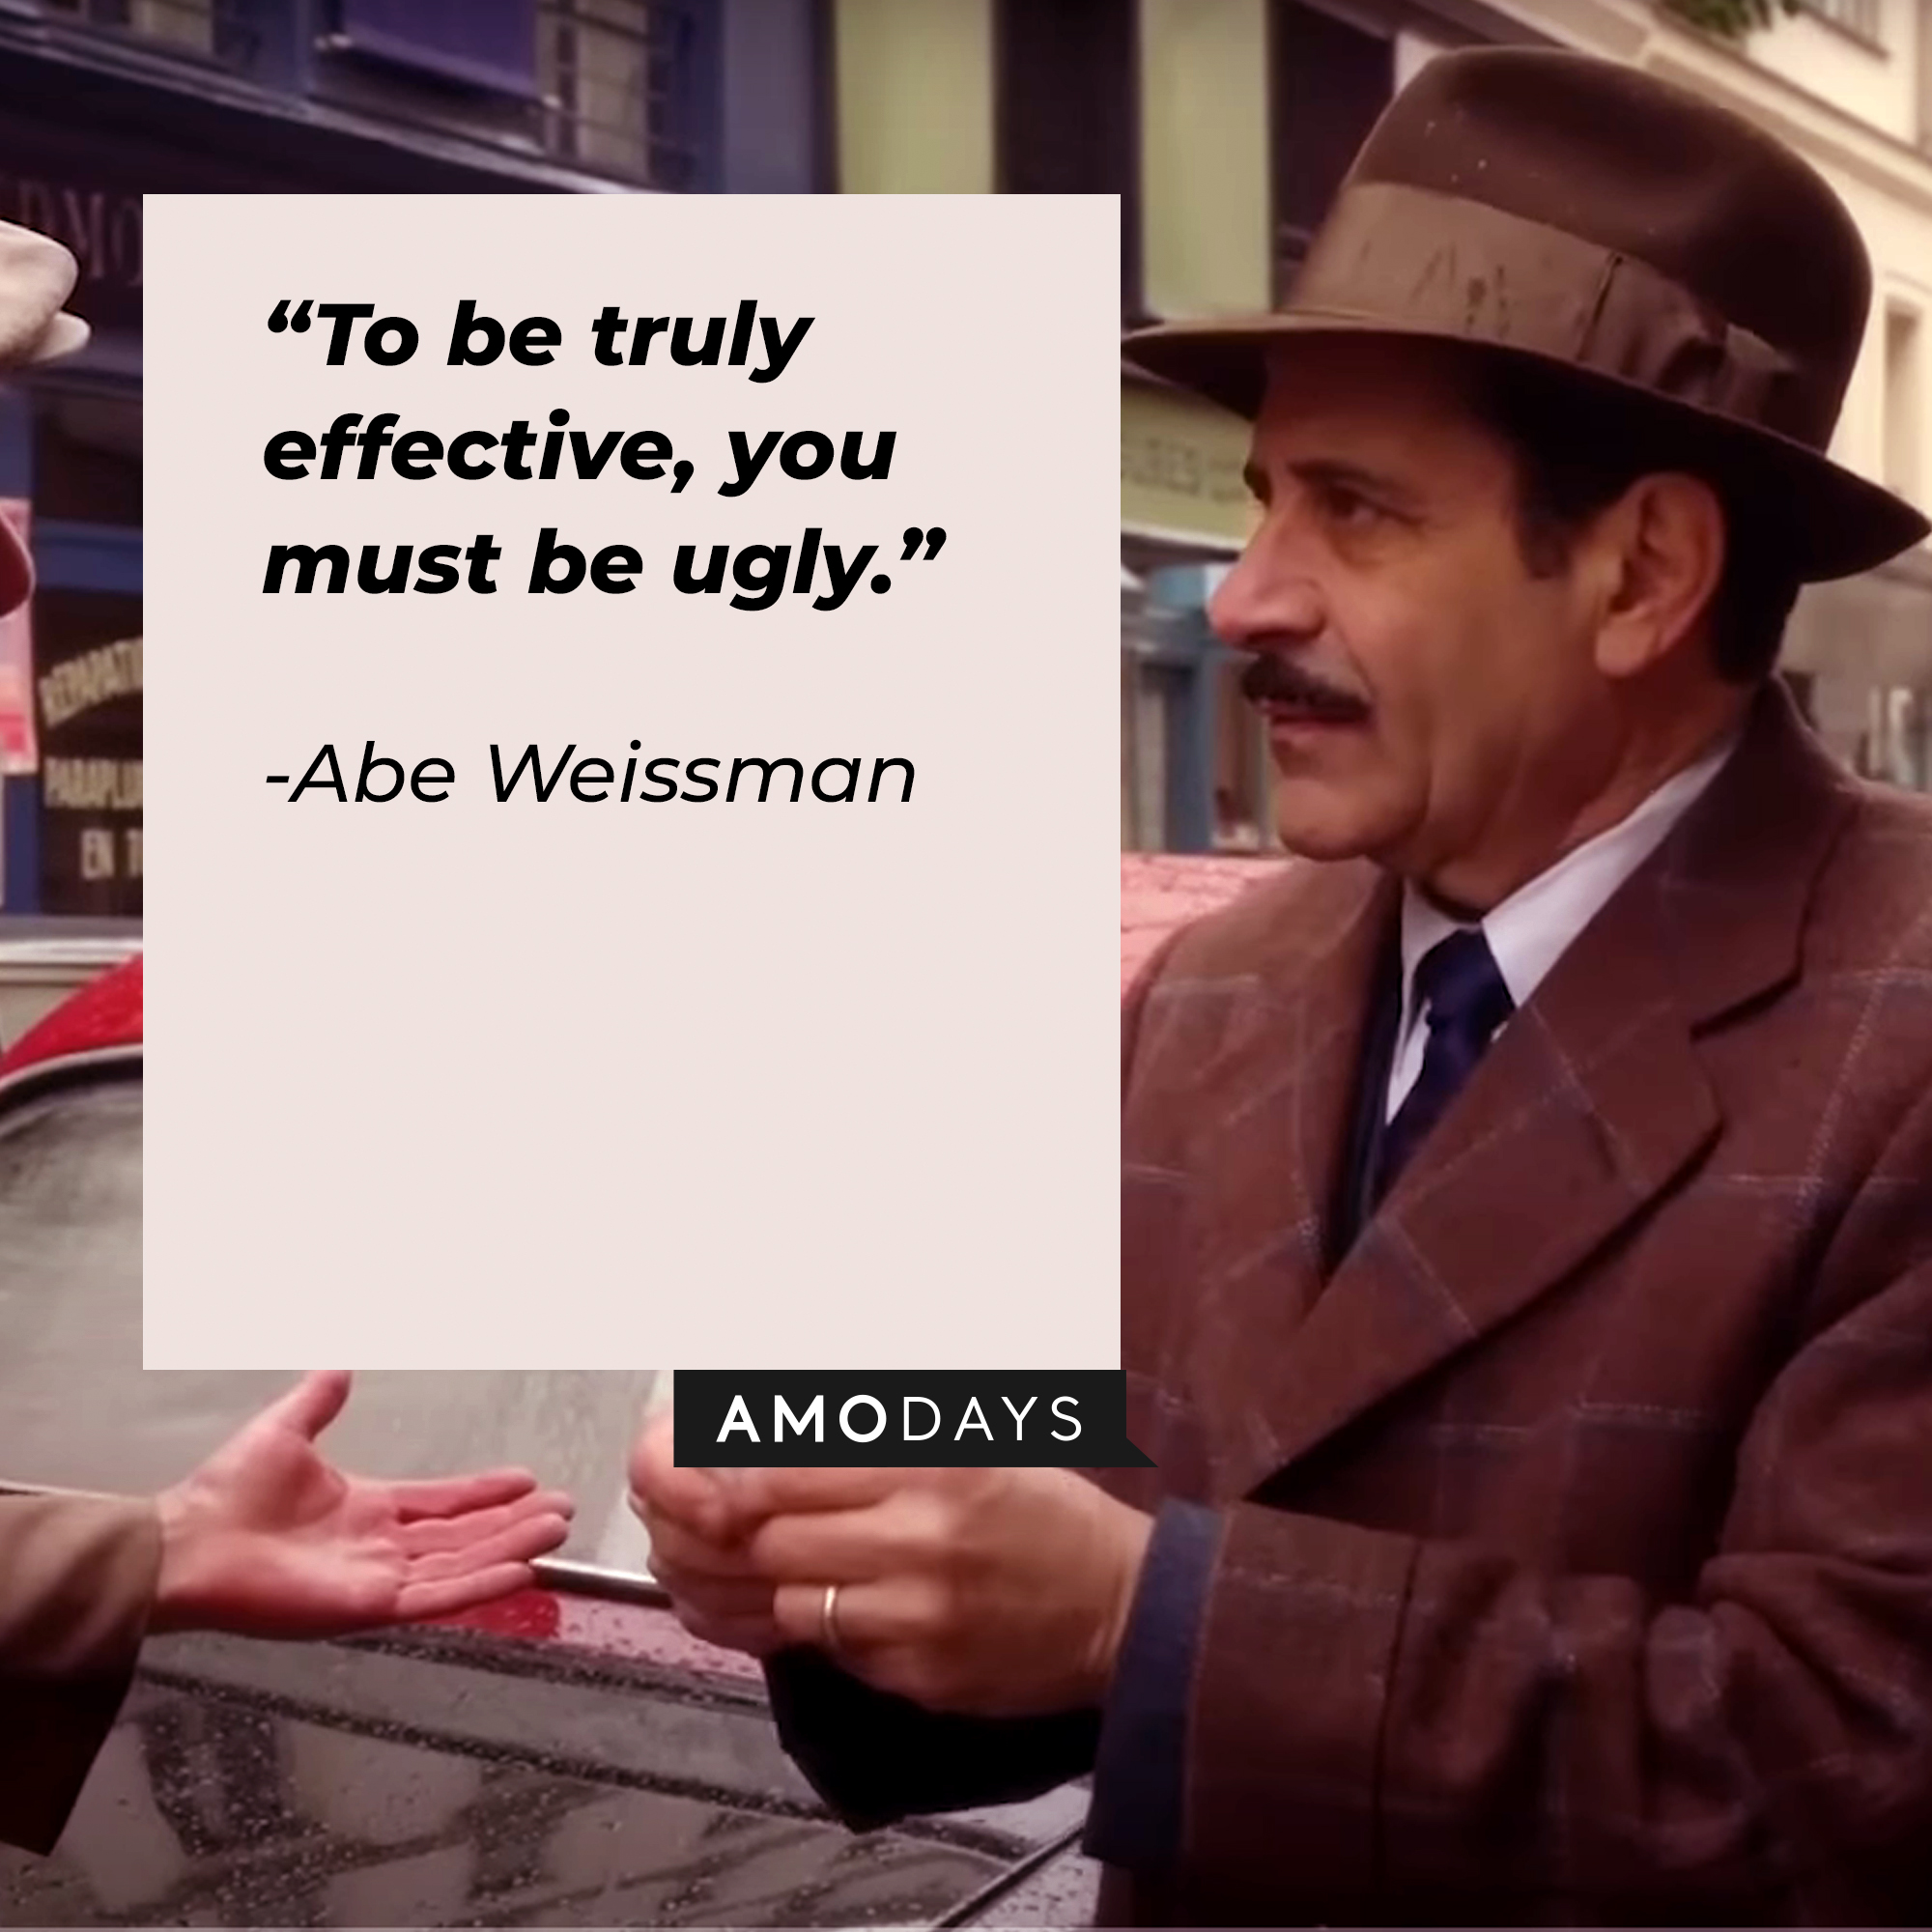 Abe Weissman, with his quote: “To be truly effective, you must be ugly.” | Source: youtube.com/PrimeVideoUK